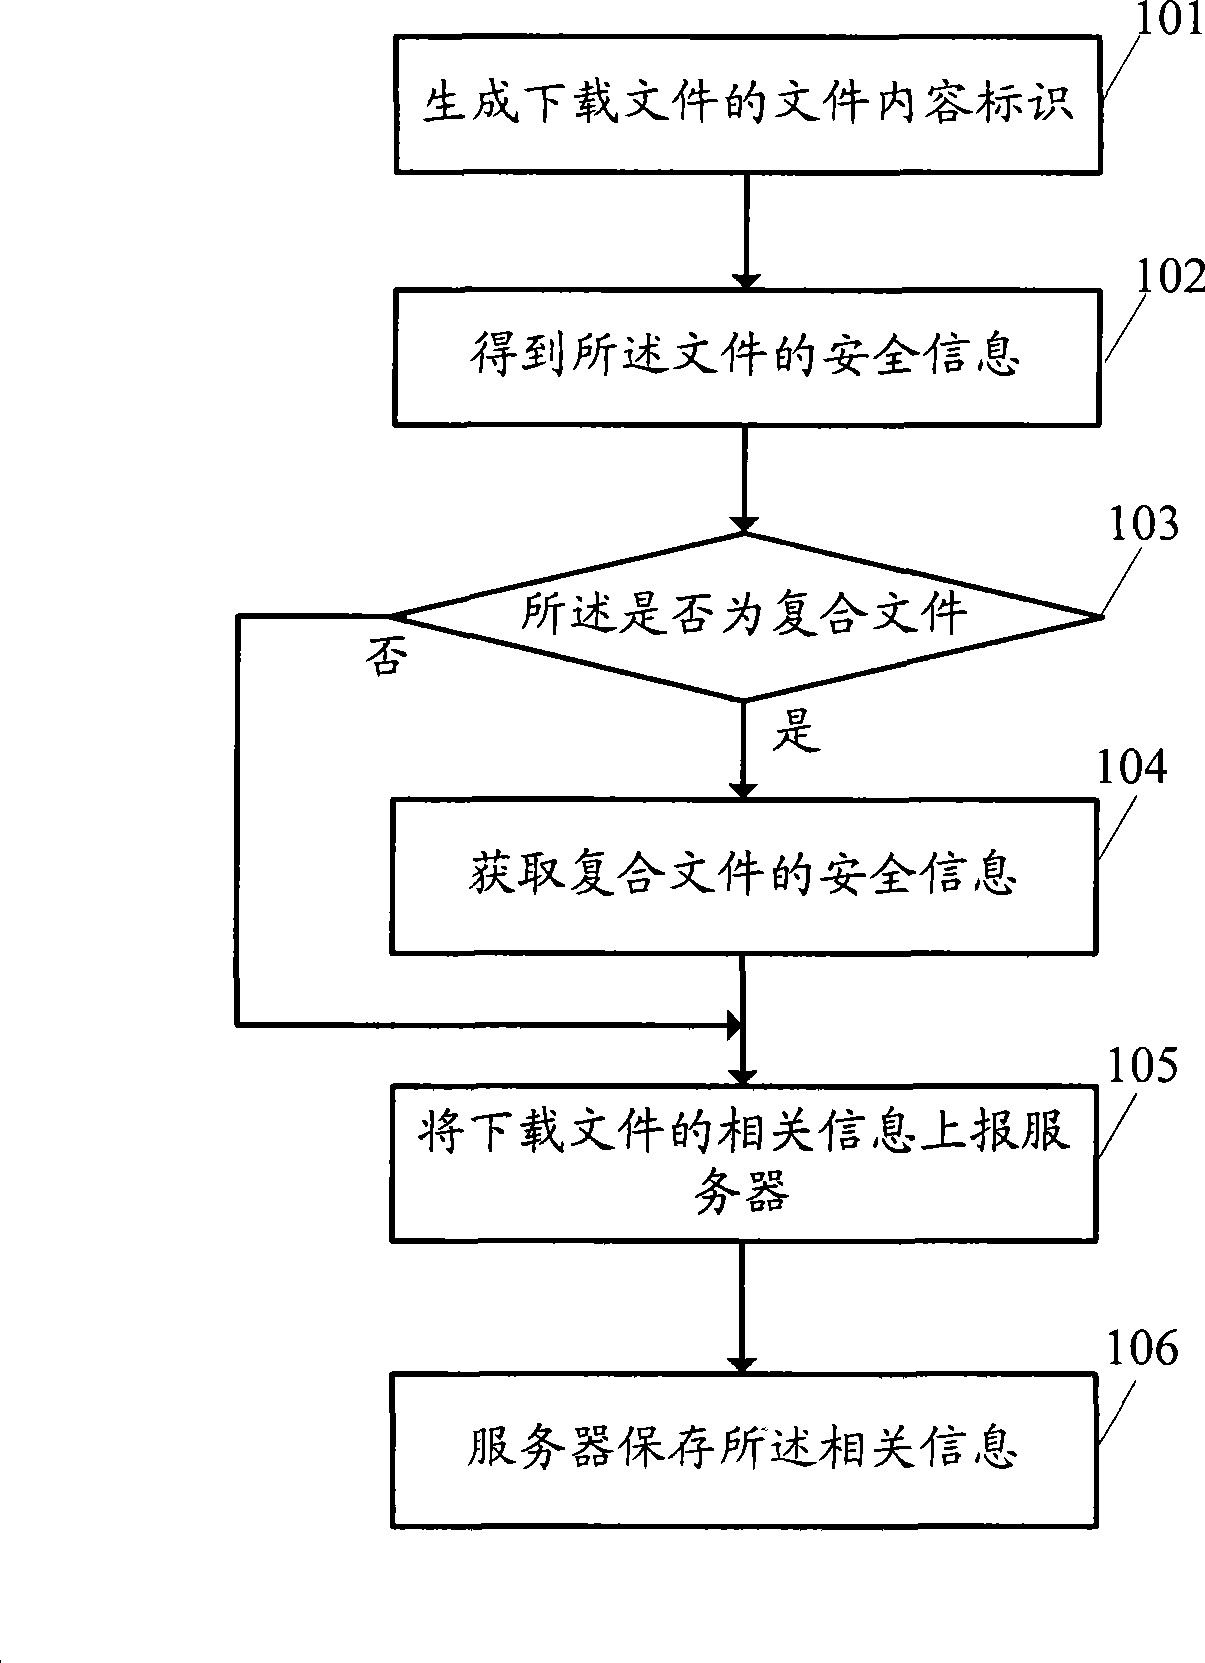 Method for providing file security information and security information processing system